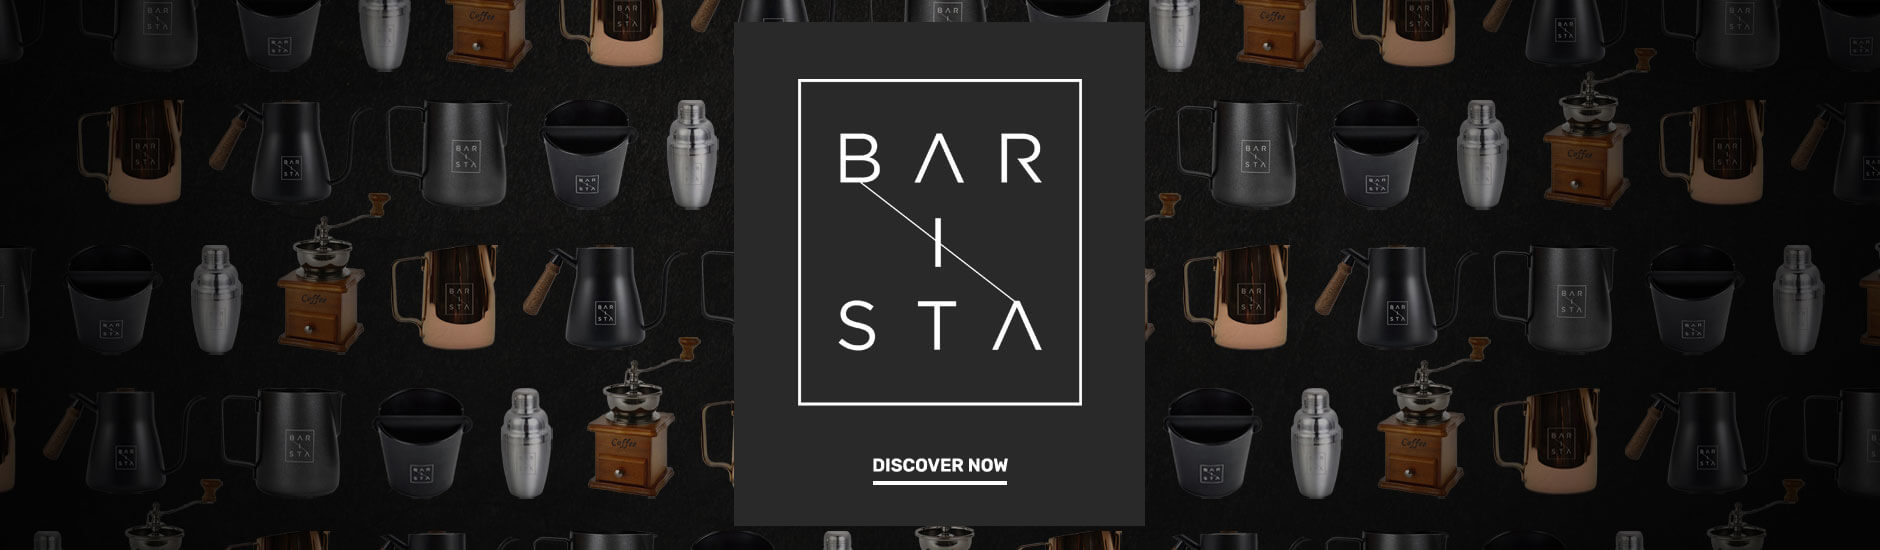 Professional Barista Tools and Coffee Accessories